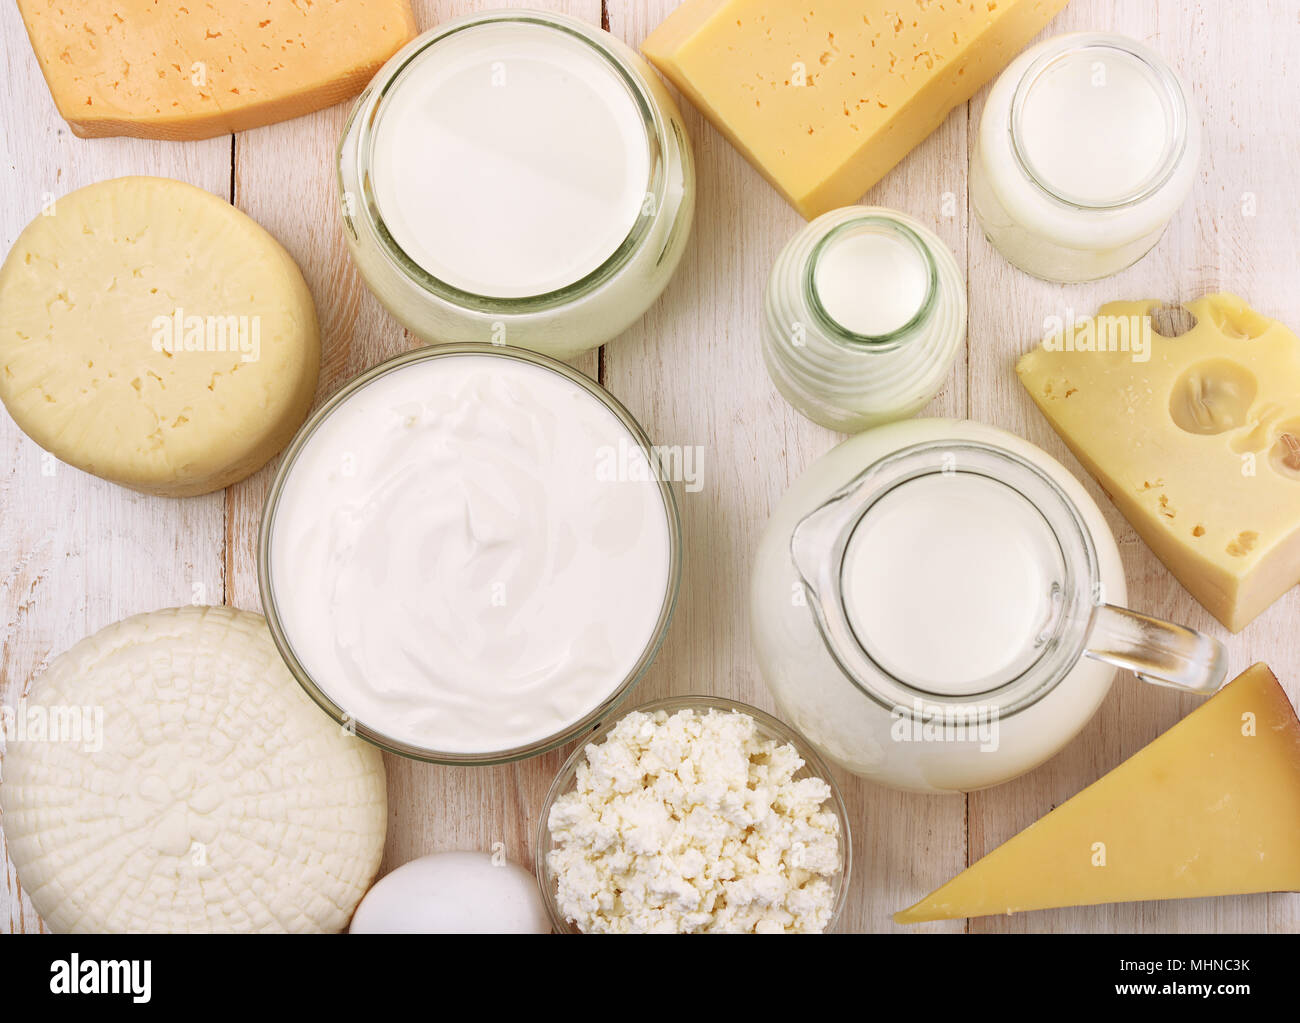 Top view of fresh dairy products on wooden table Stock Photo